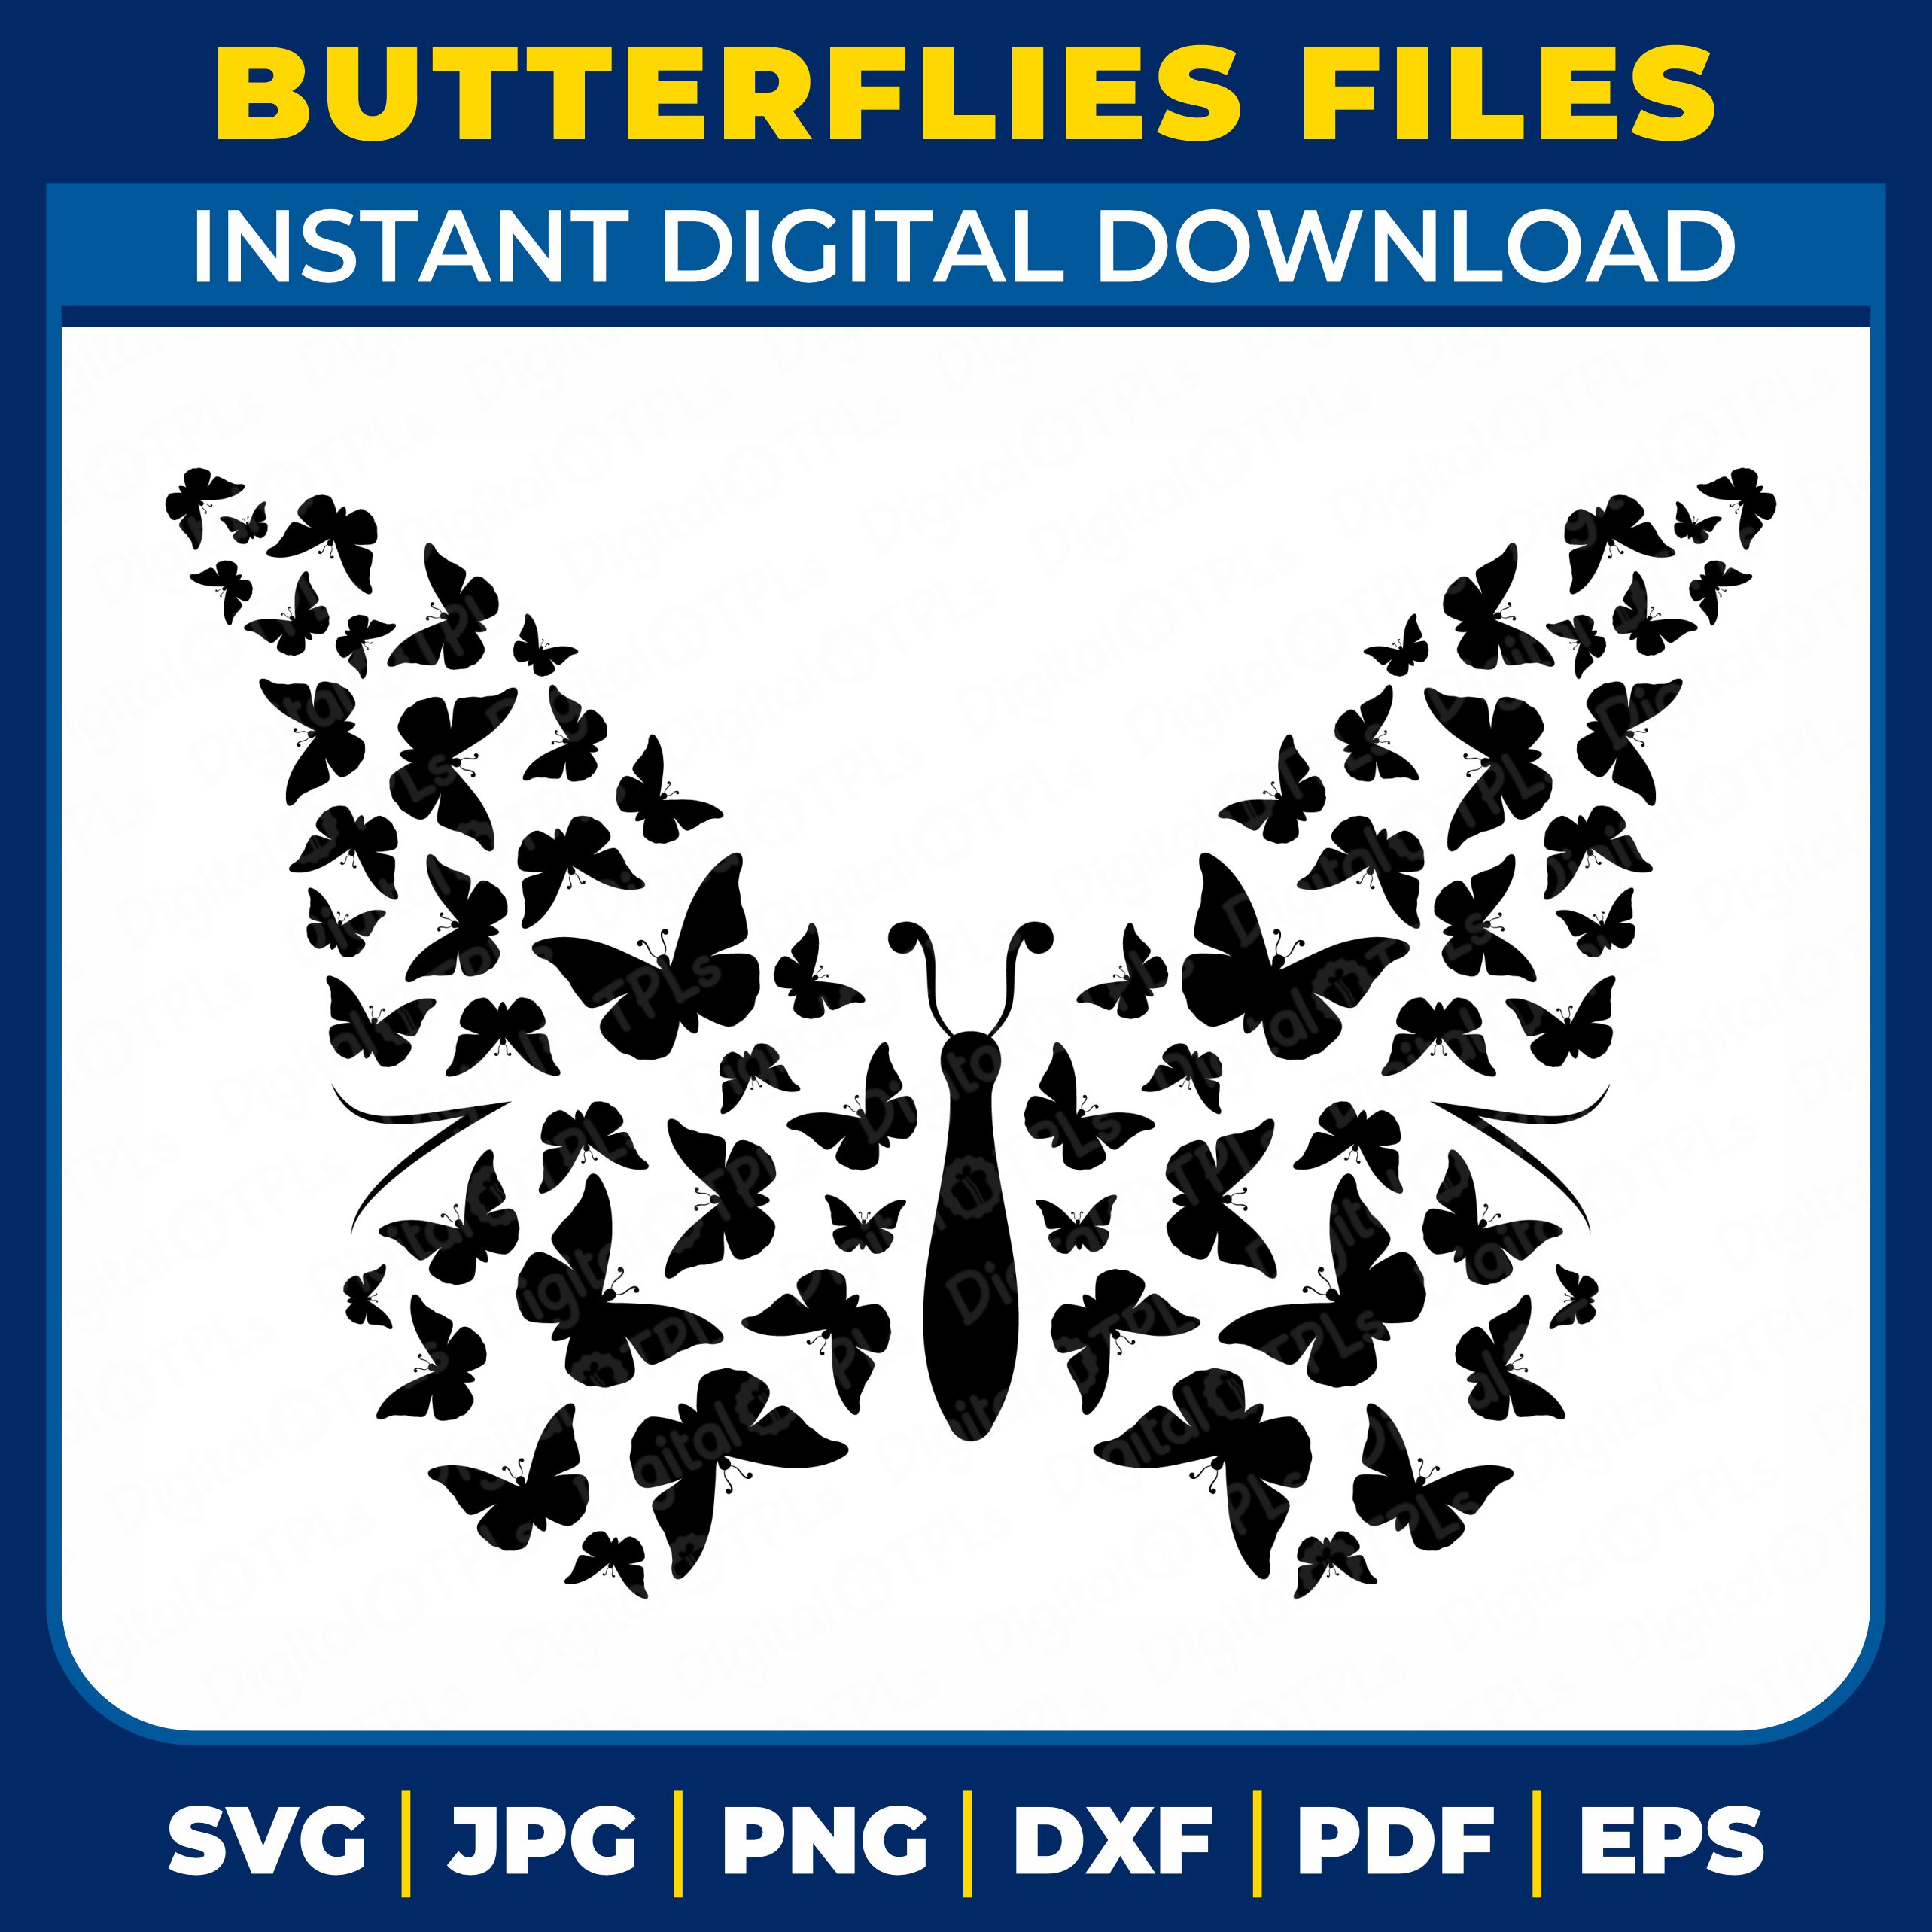 Many Butterflies SVG Files cover image.